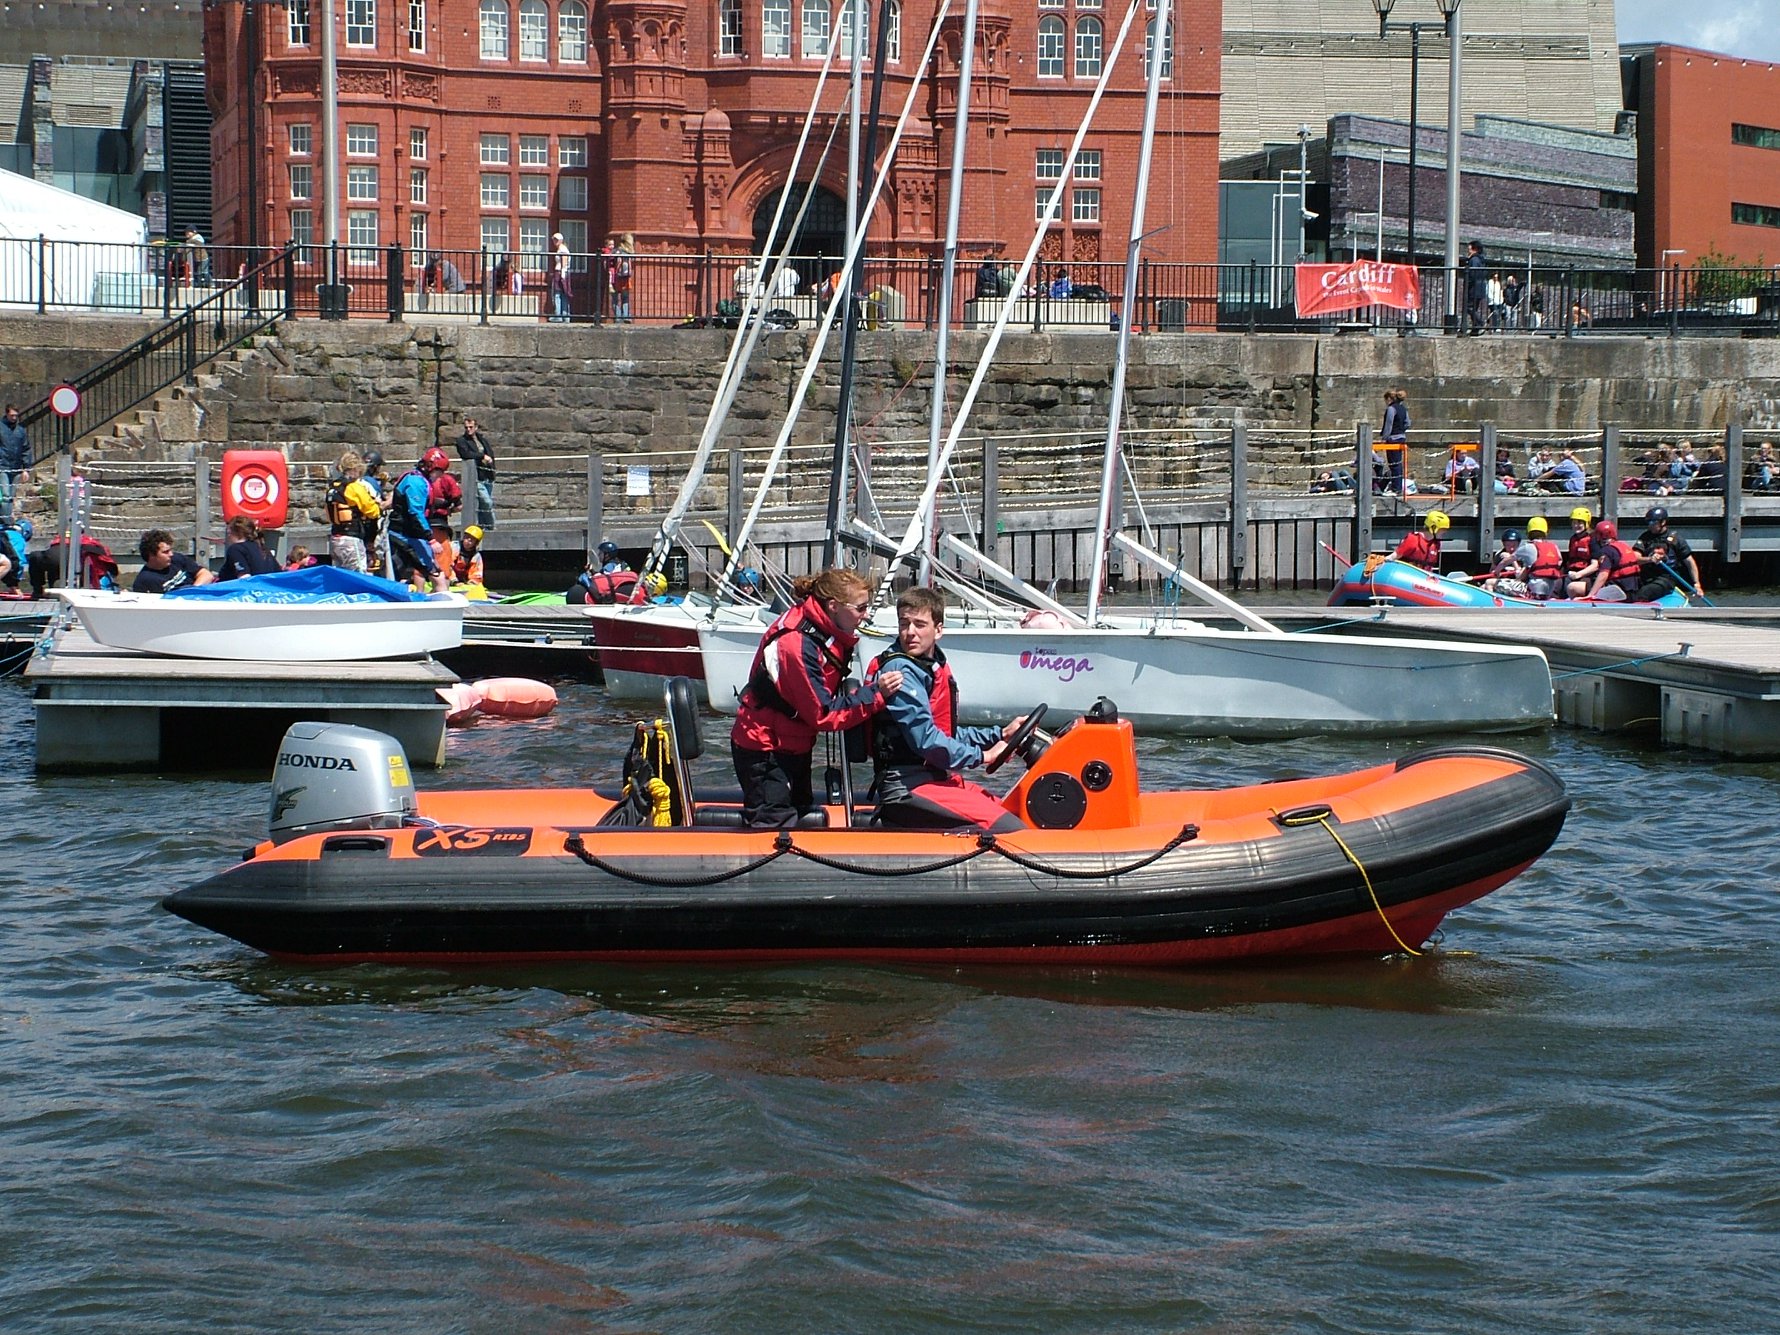 Cardiff Bay Water Activity Centres